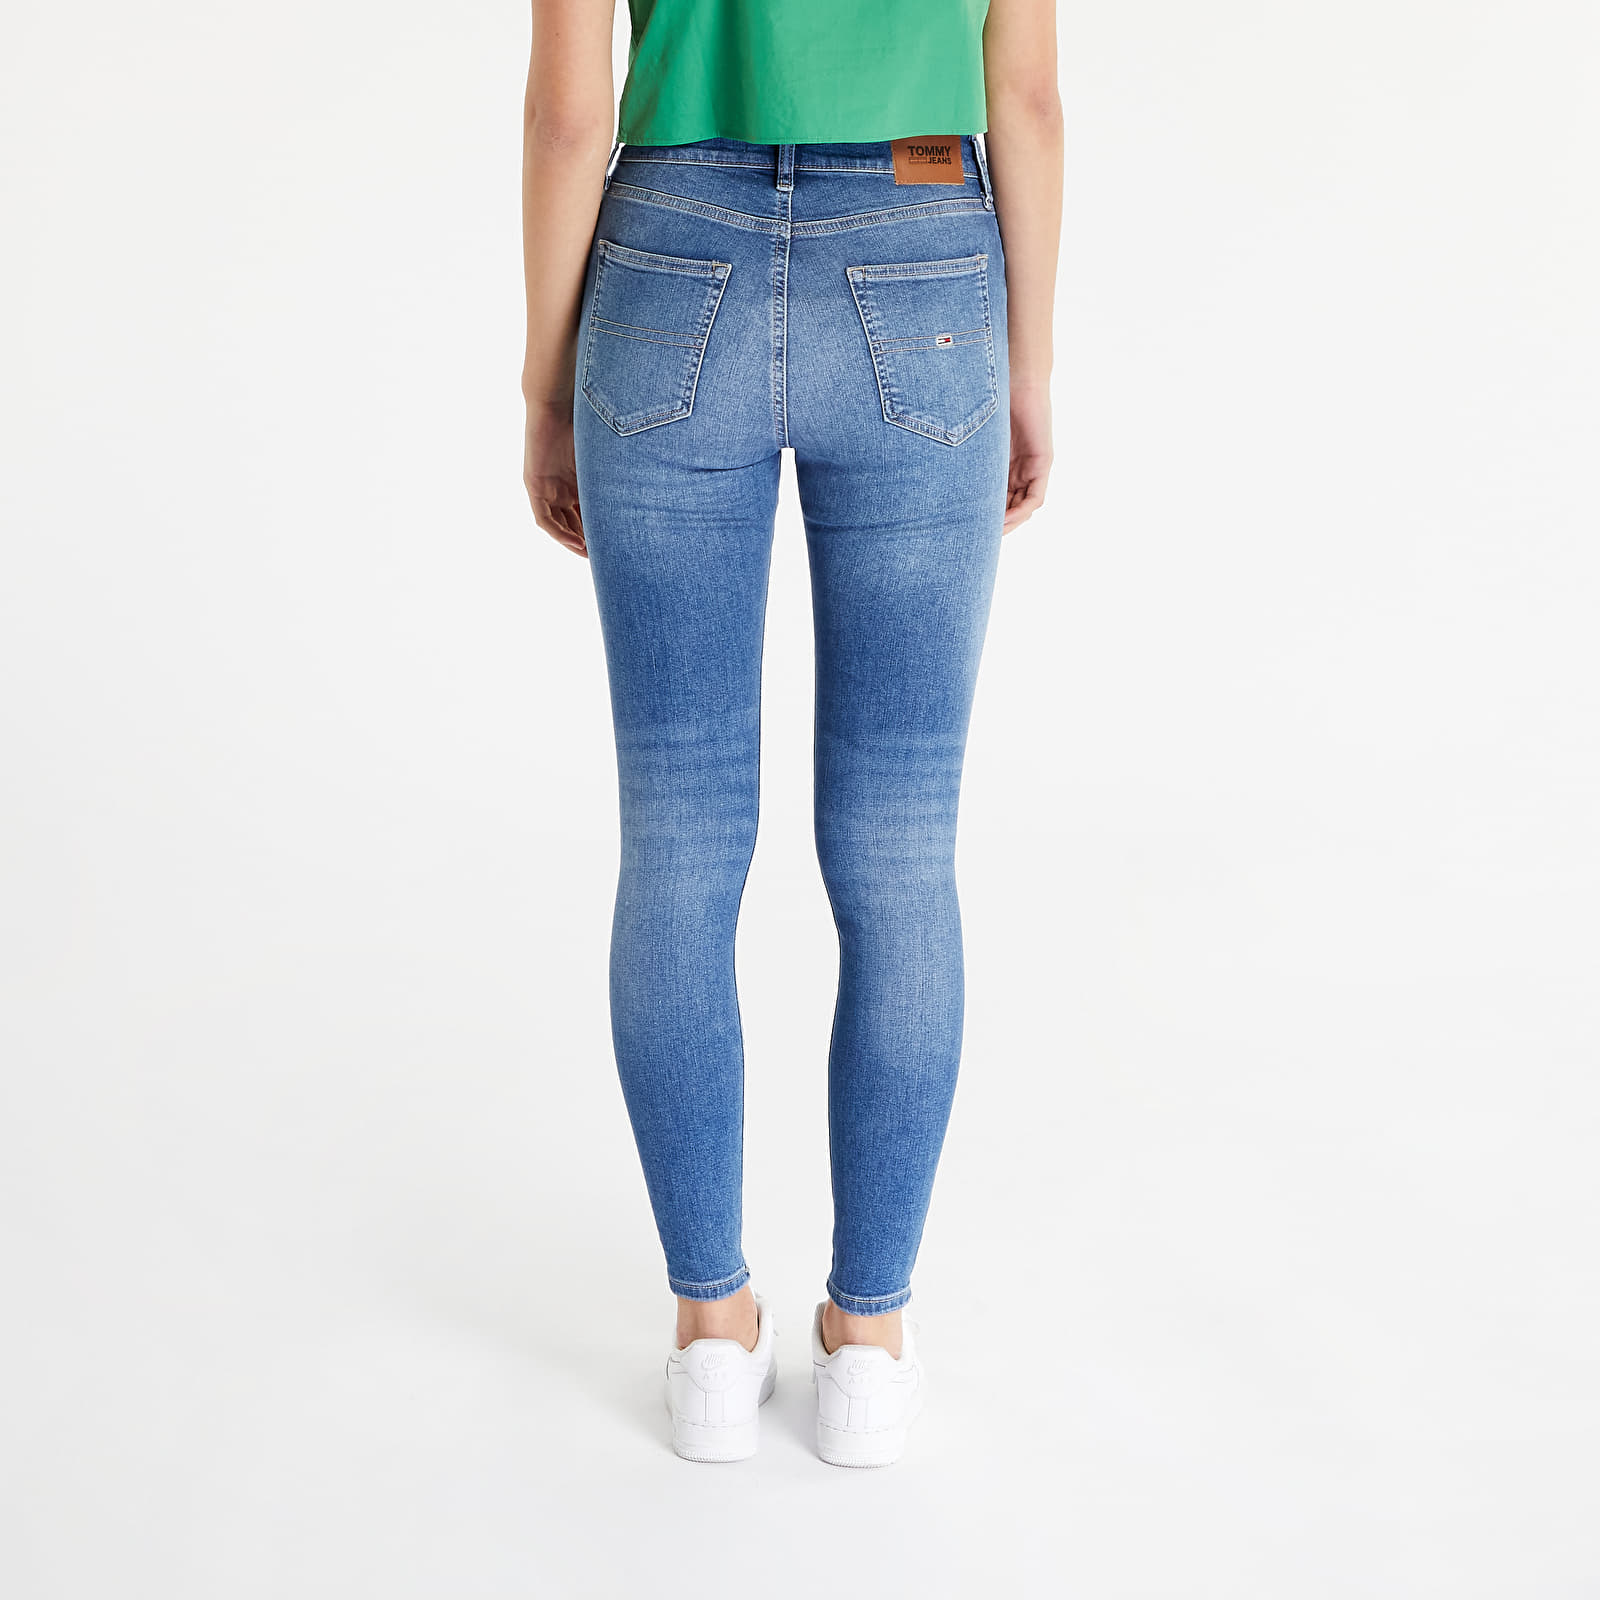 Queens Super Jeans Denim Skinny Jeans Sylvia Light Rise TOMMY High | JEANS